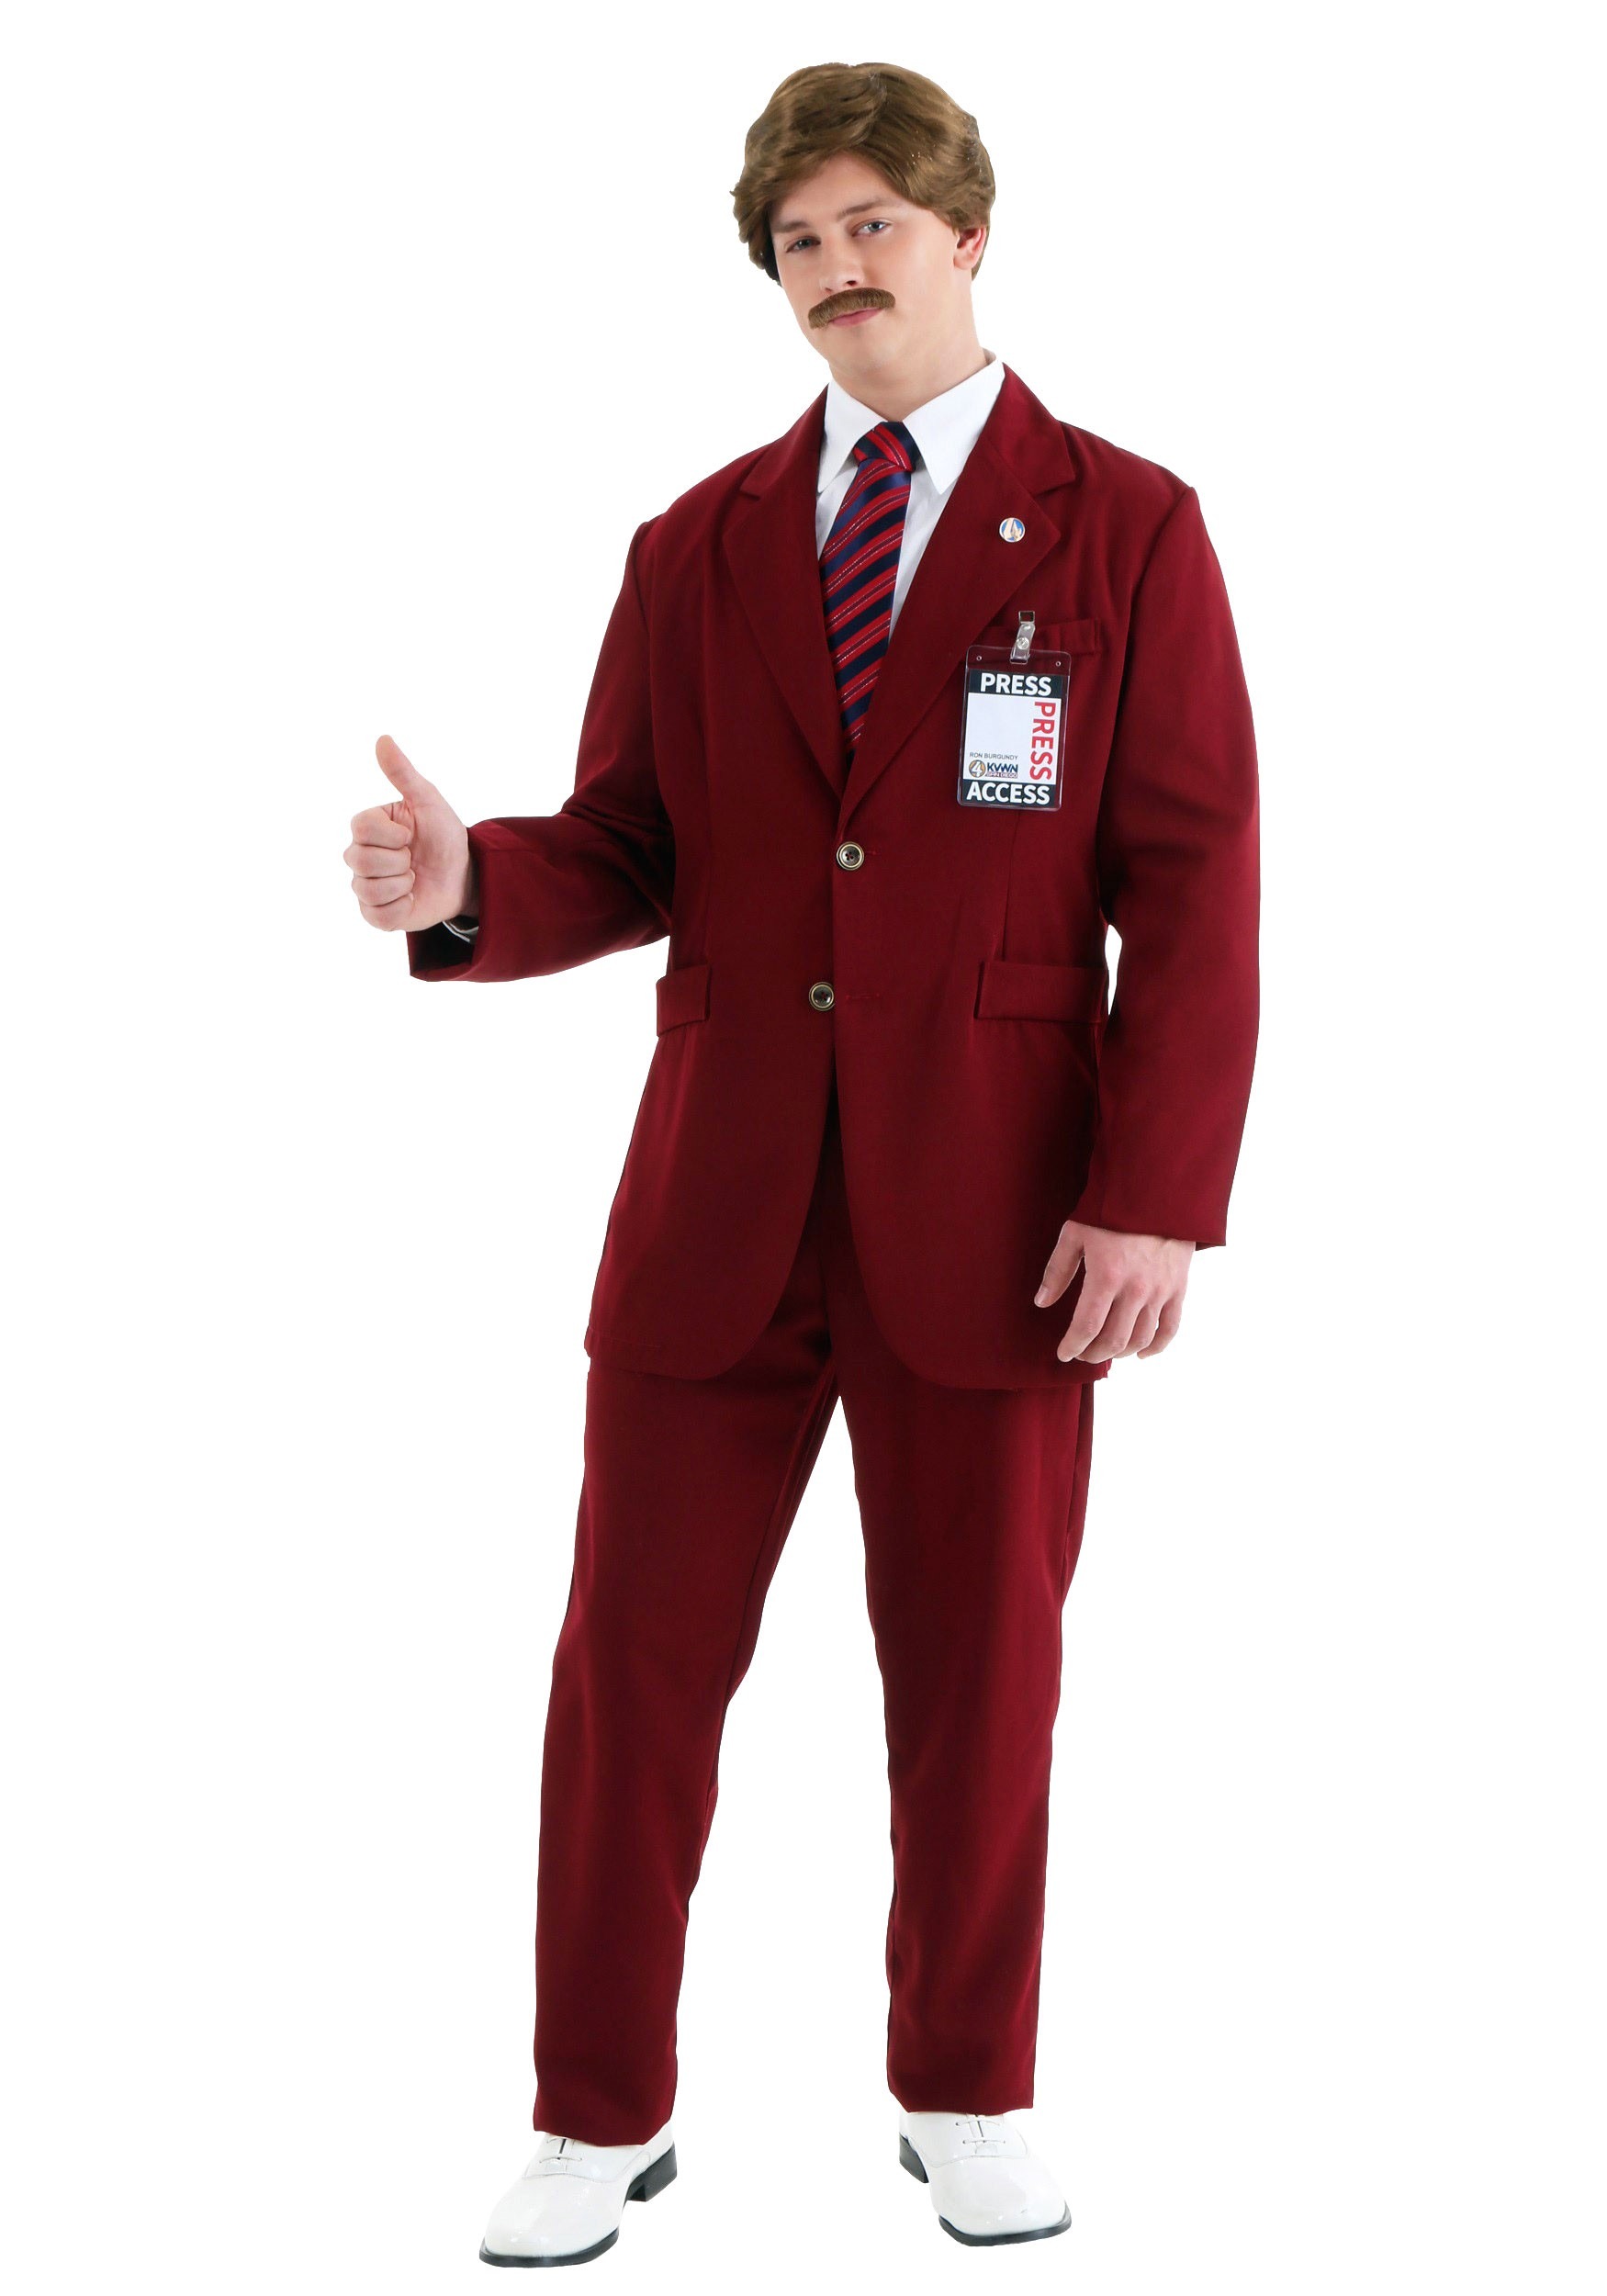 Photos - Fancy Dress Deluxe FUN Costumes  Ron Burgundy Costume Suit Red 